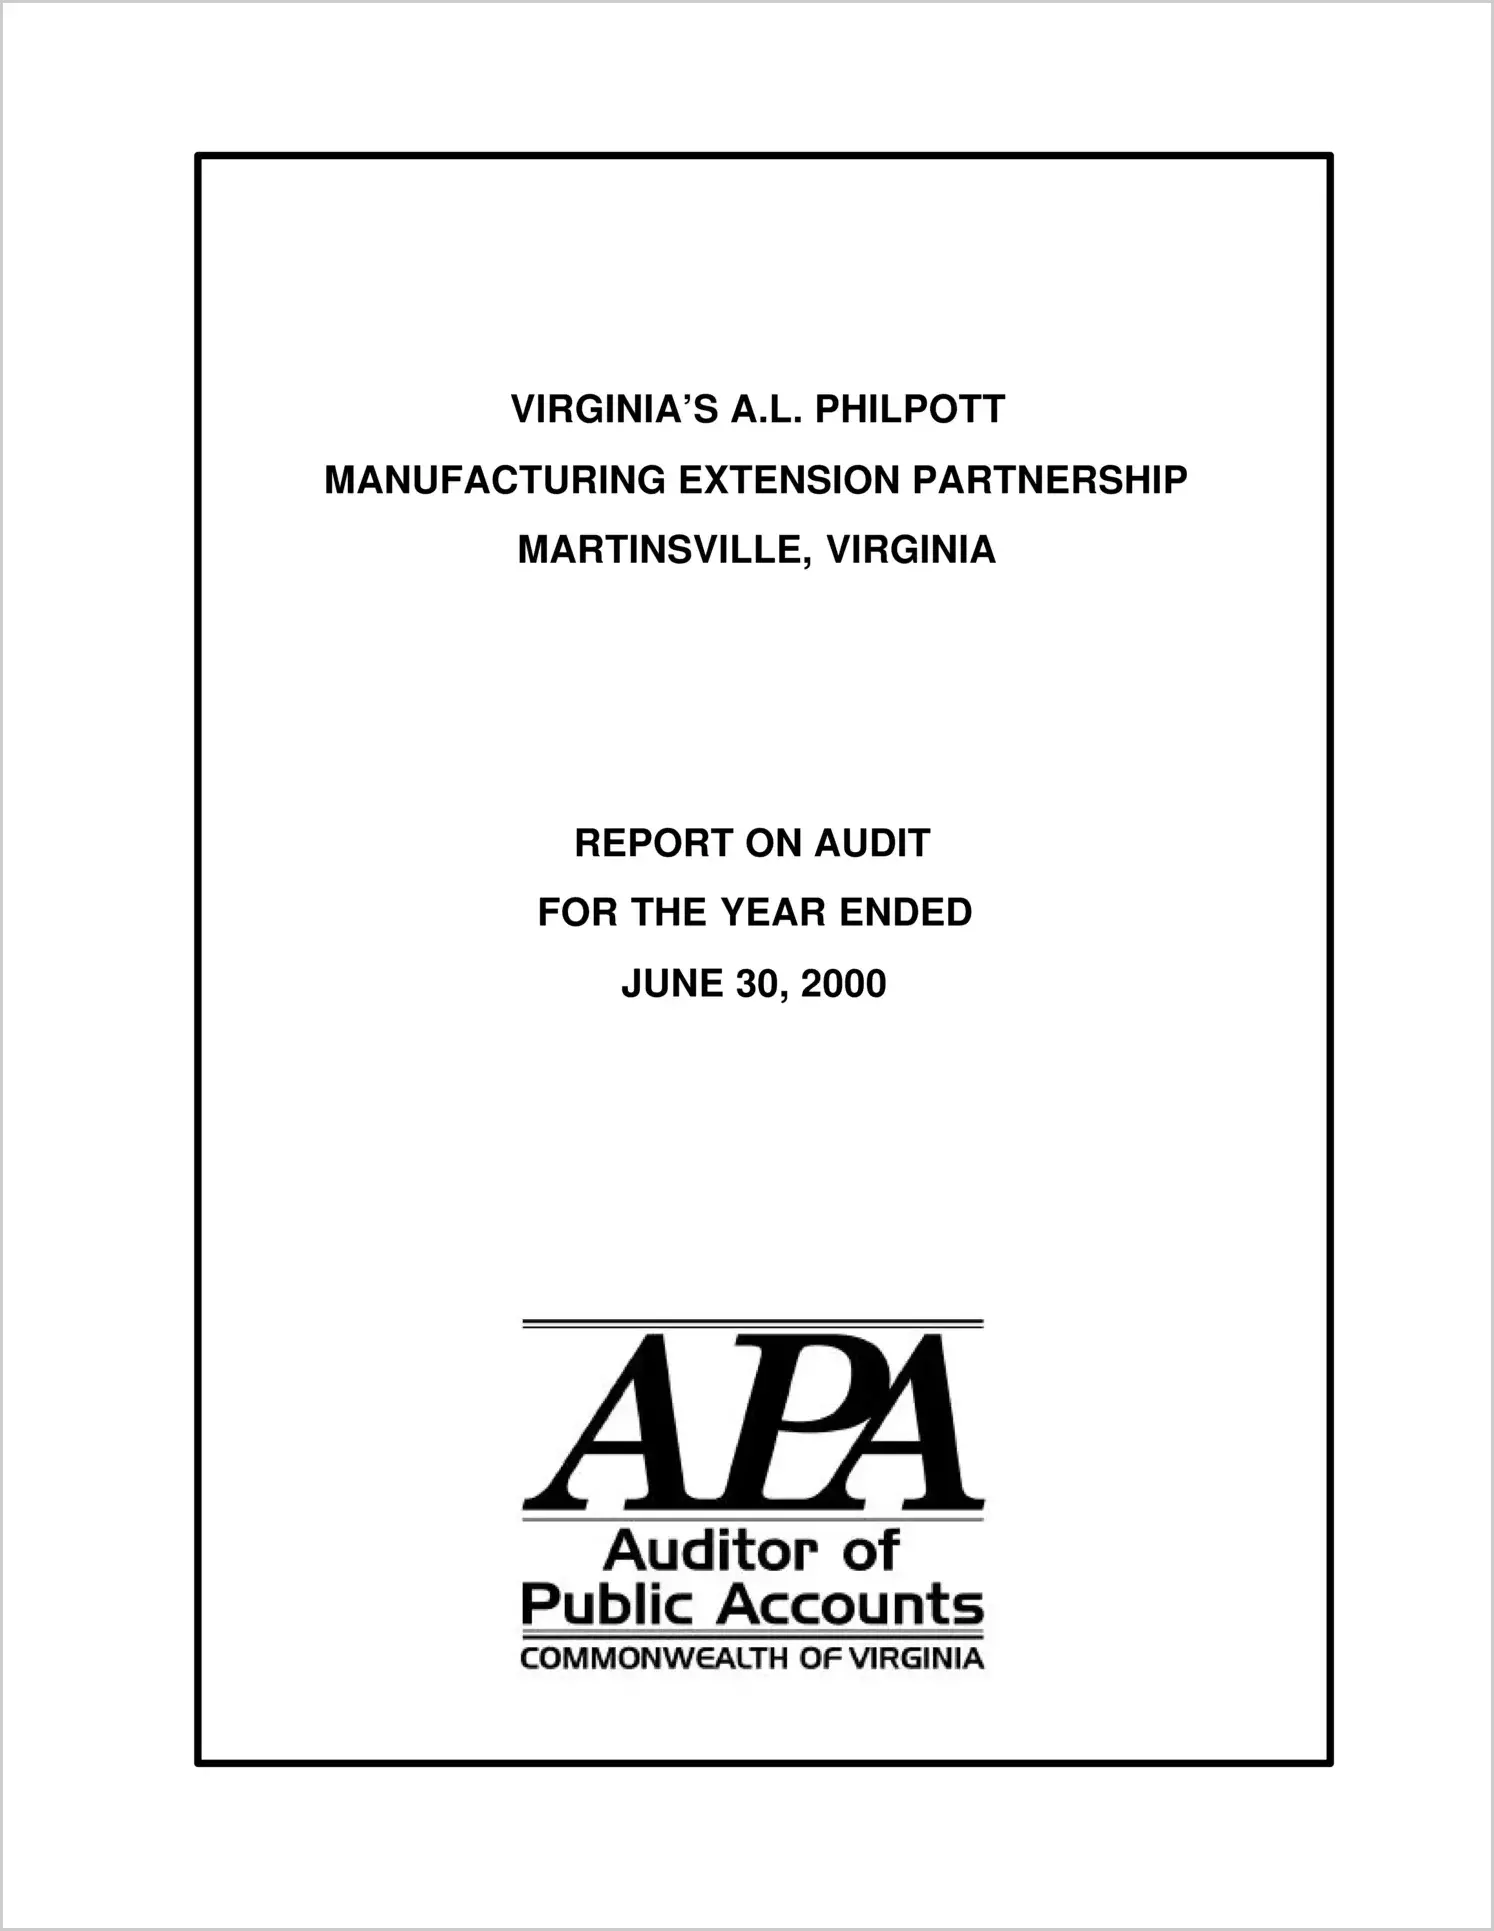 Virginia`s A. L. Philpott Manufacturing Extension Partnership for the year ended June 30, 2000